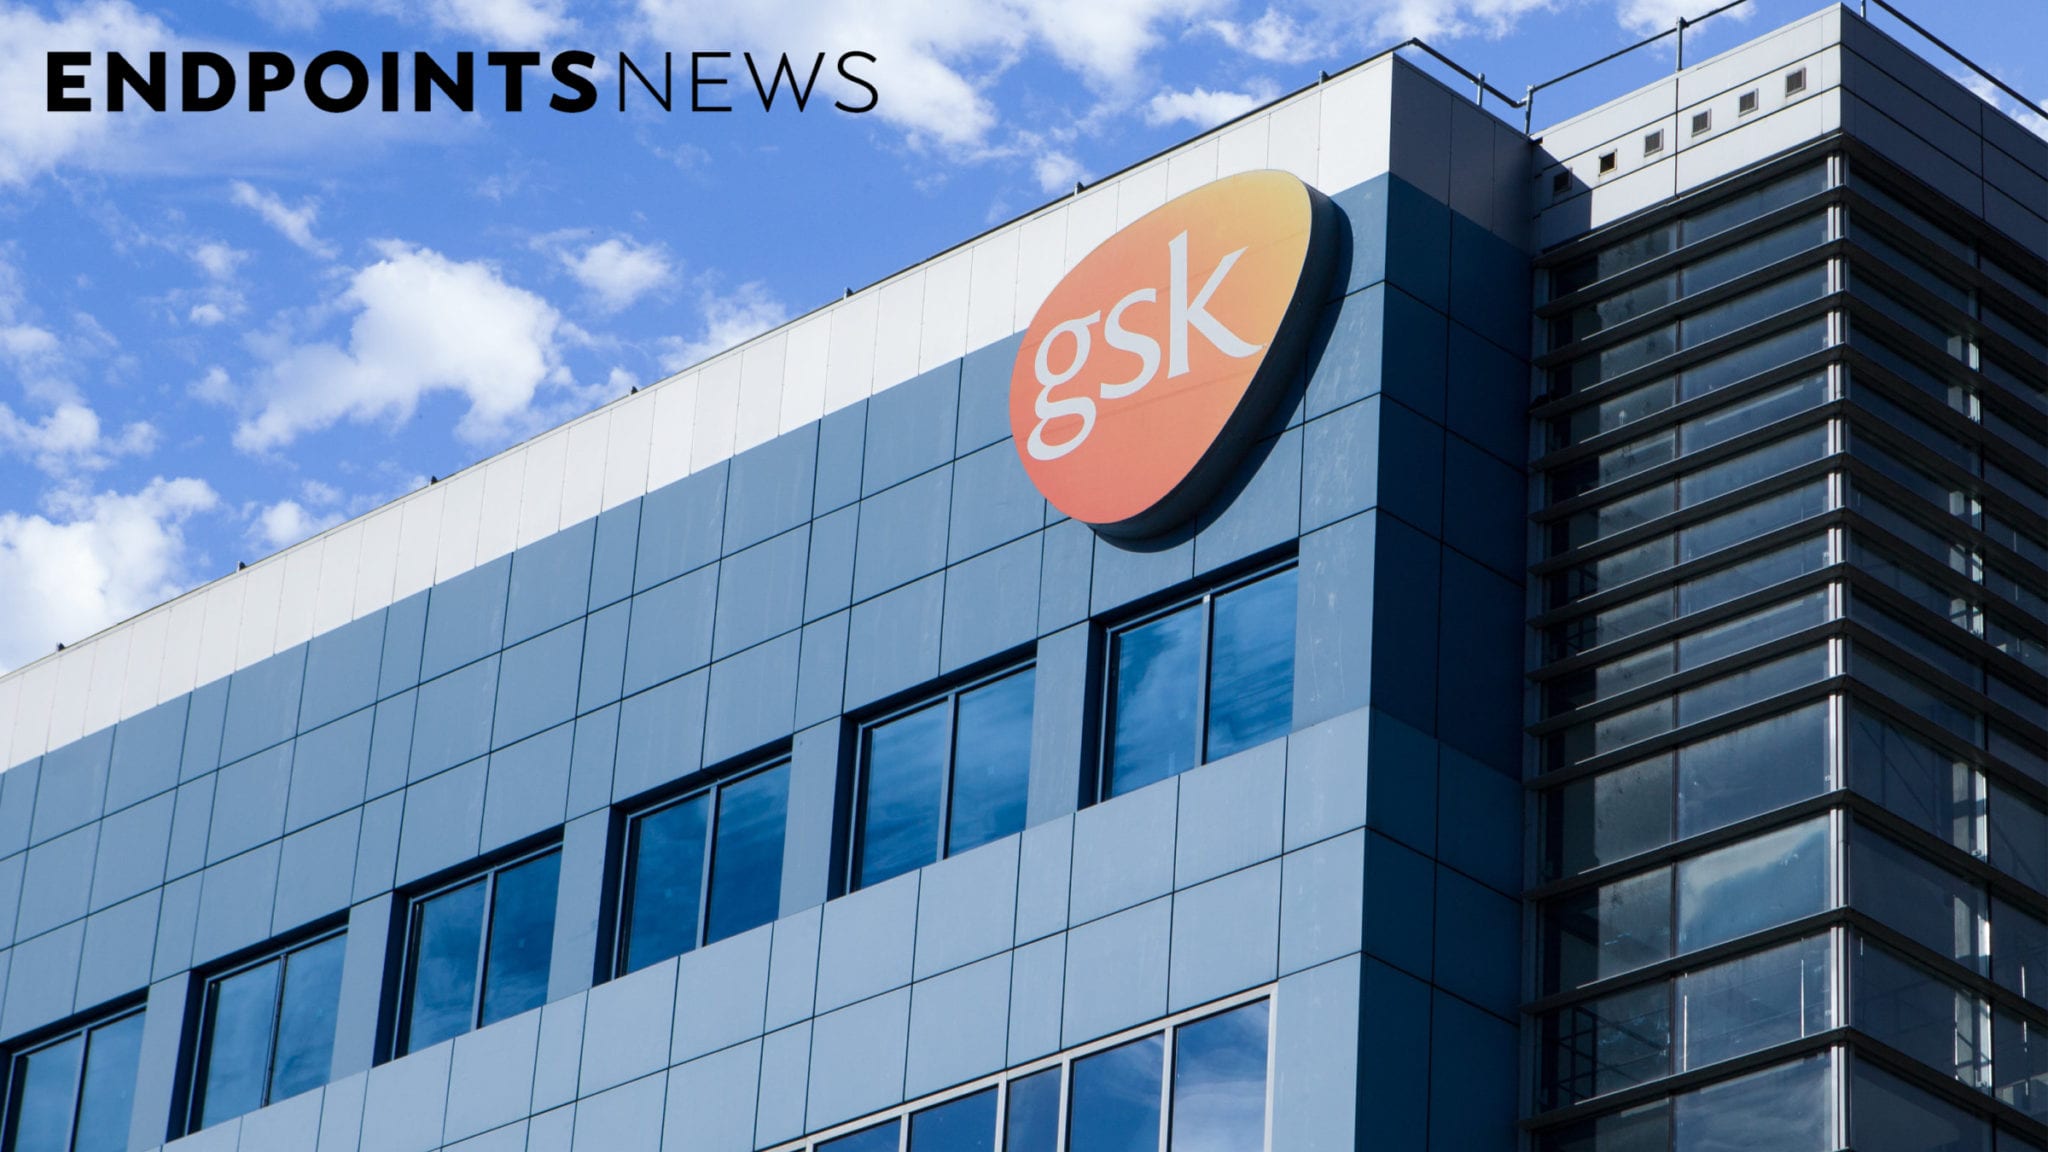 GlaxoSmithKline rethinks the strategy for the Covid-19 antibody – not the Vir – after the test failed.  Is there hope in high-risk patients?  – News from Endpoints